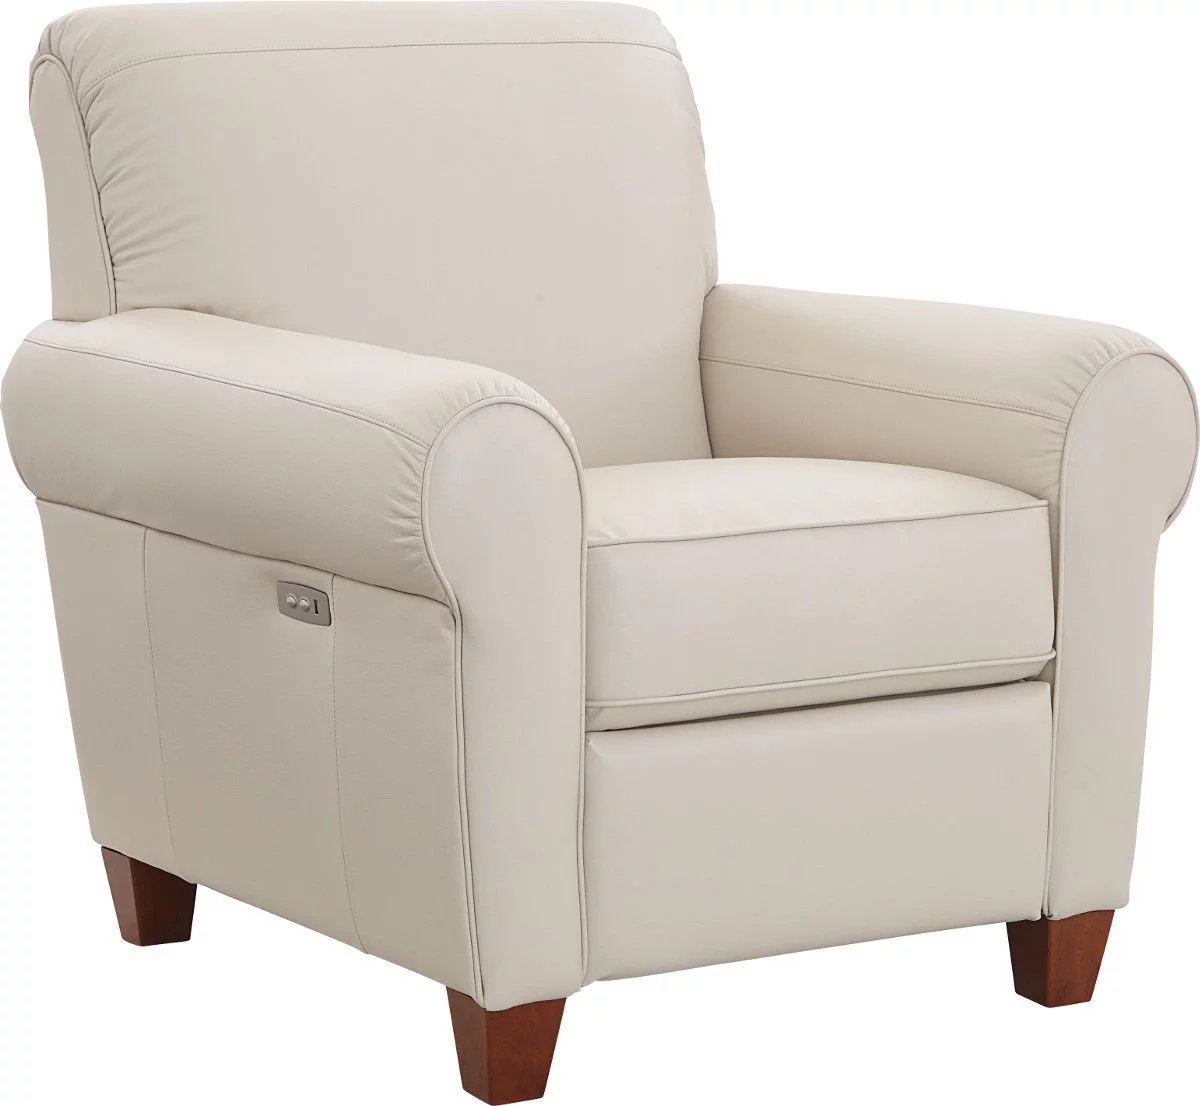 How much does a recliner cost?